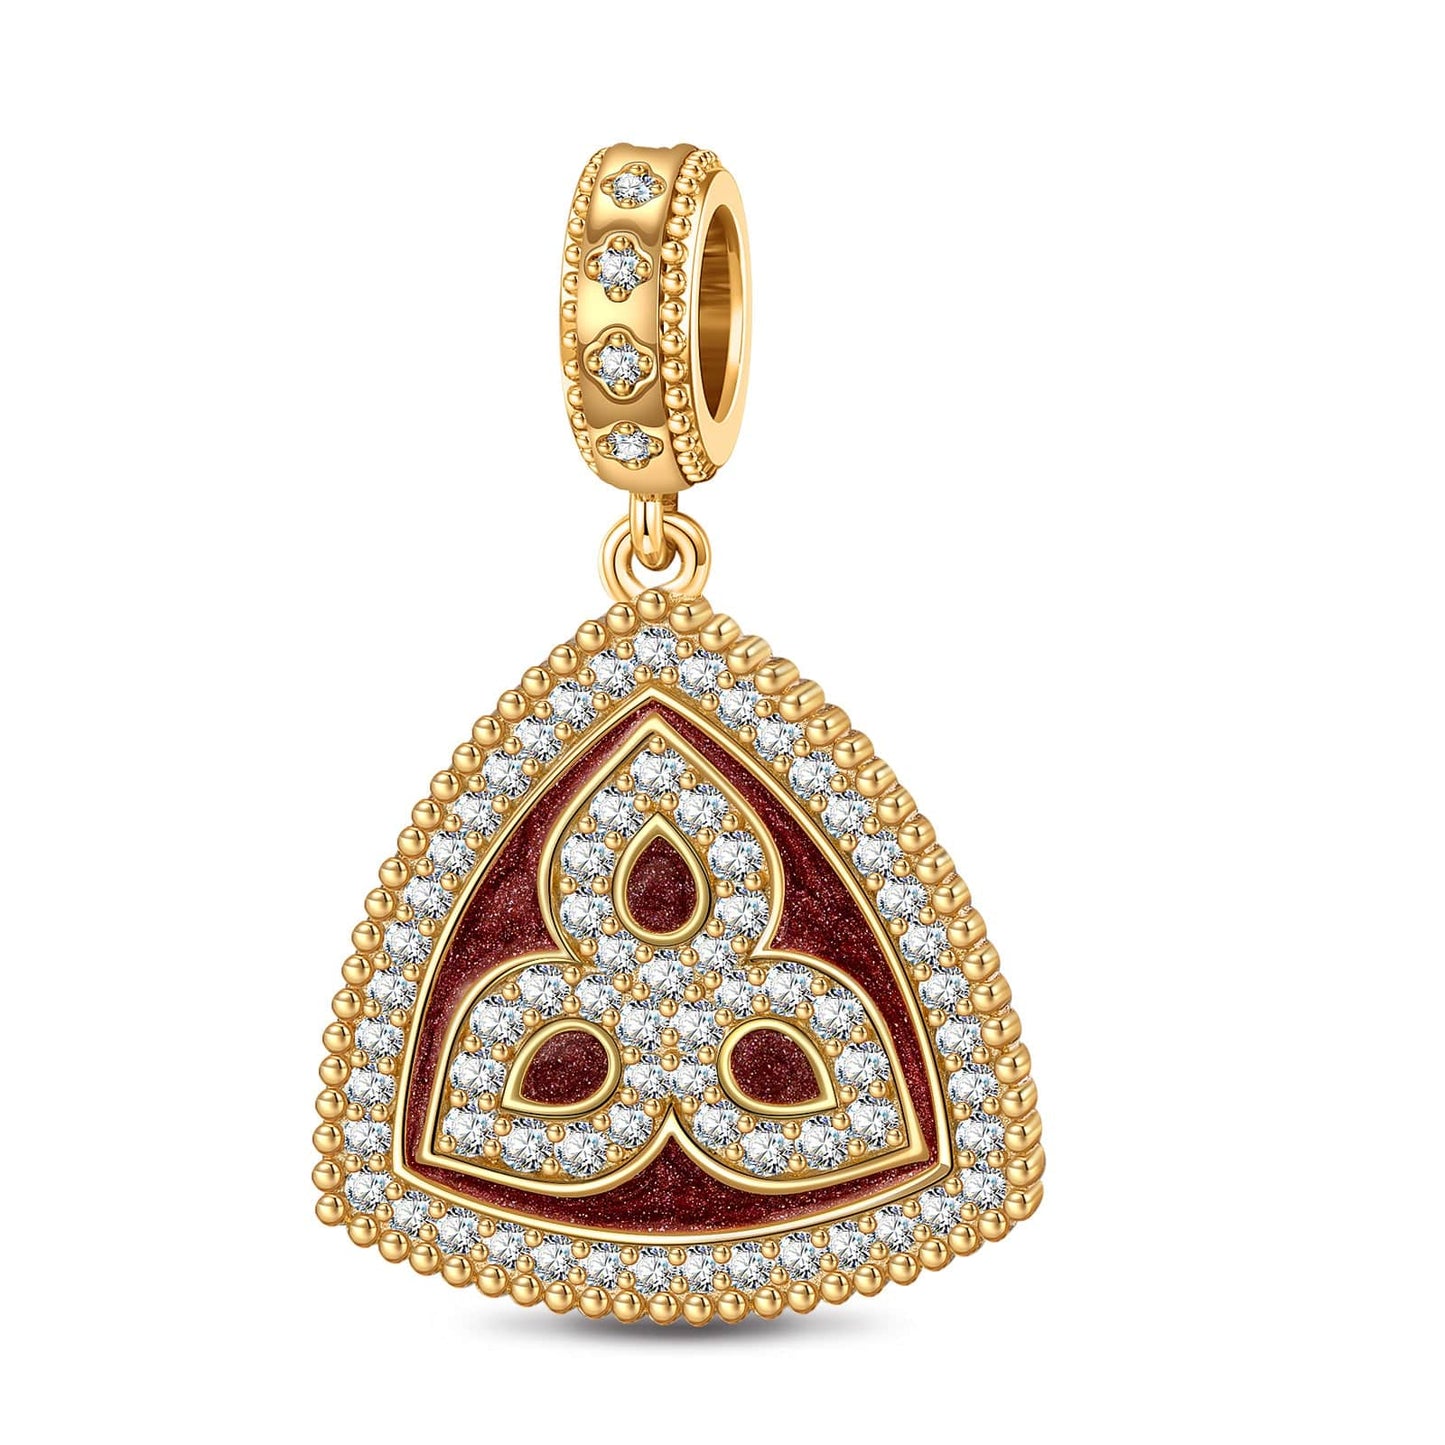 Triangle and Shamrock Tarnish-resistant Silver Charms With Enamel In 14K Gold Plated